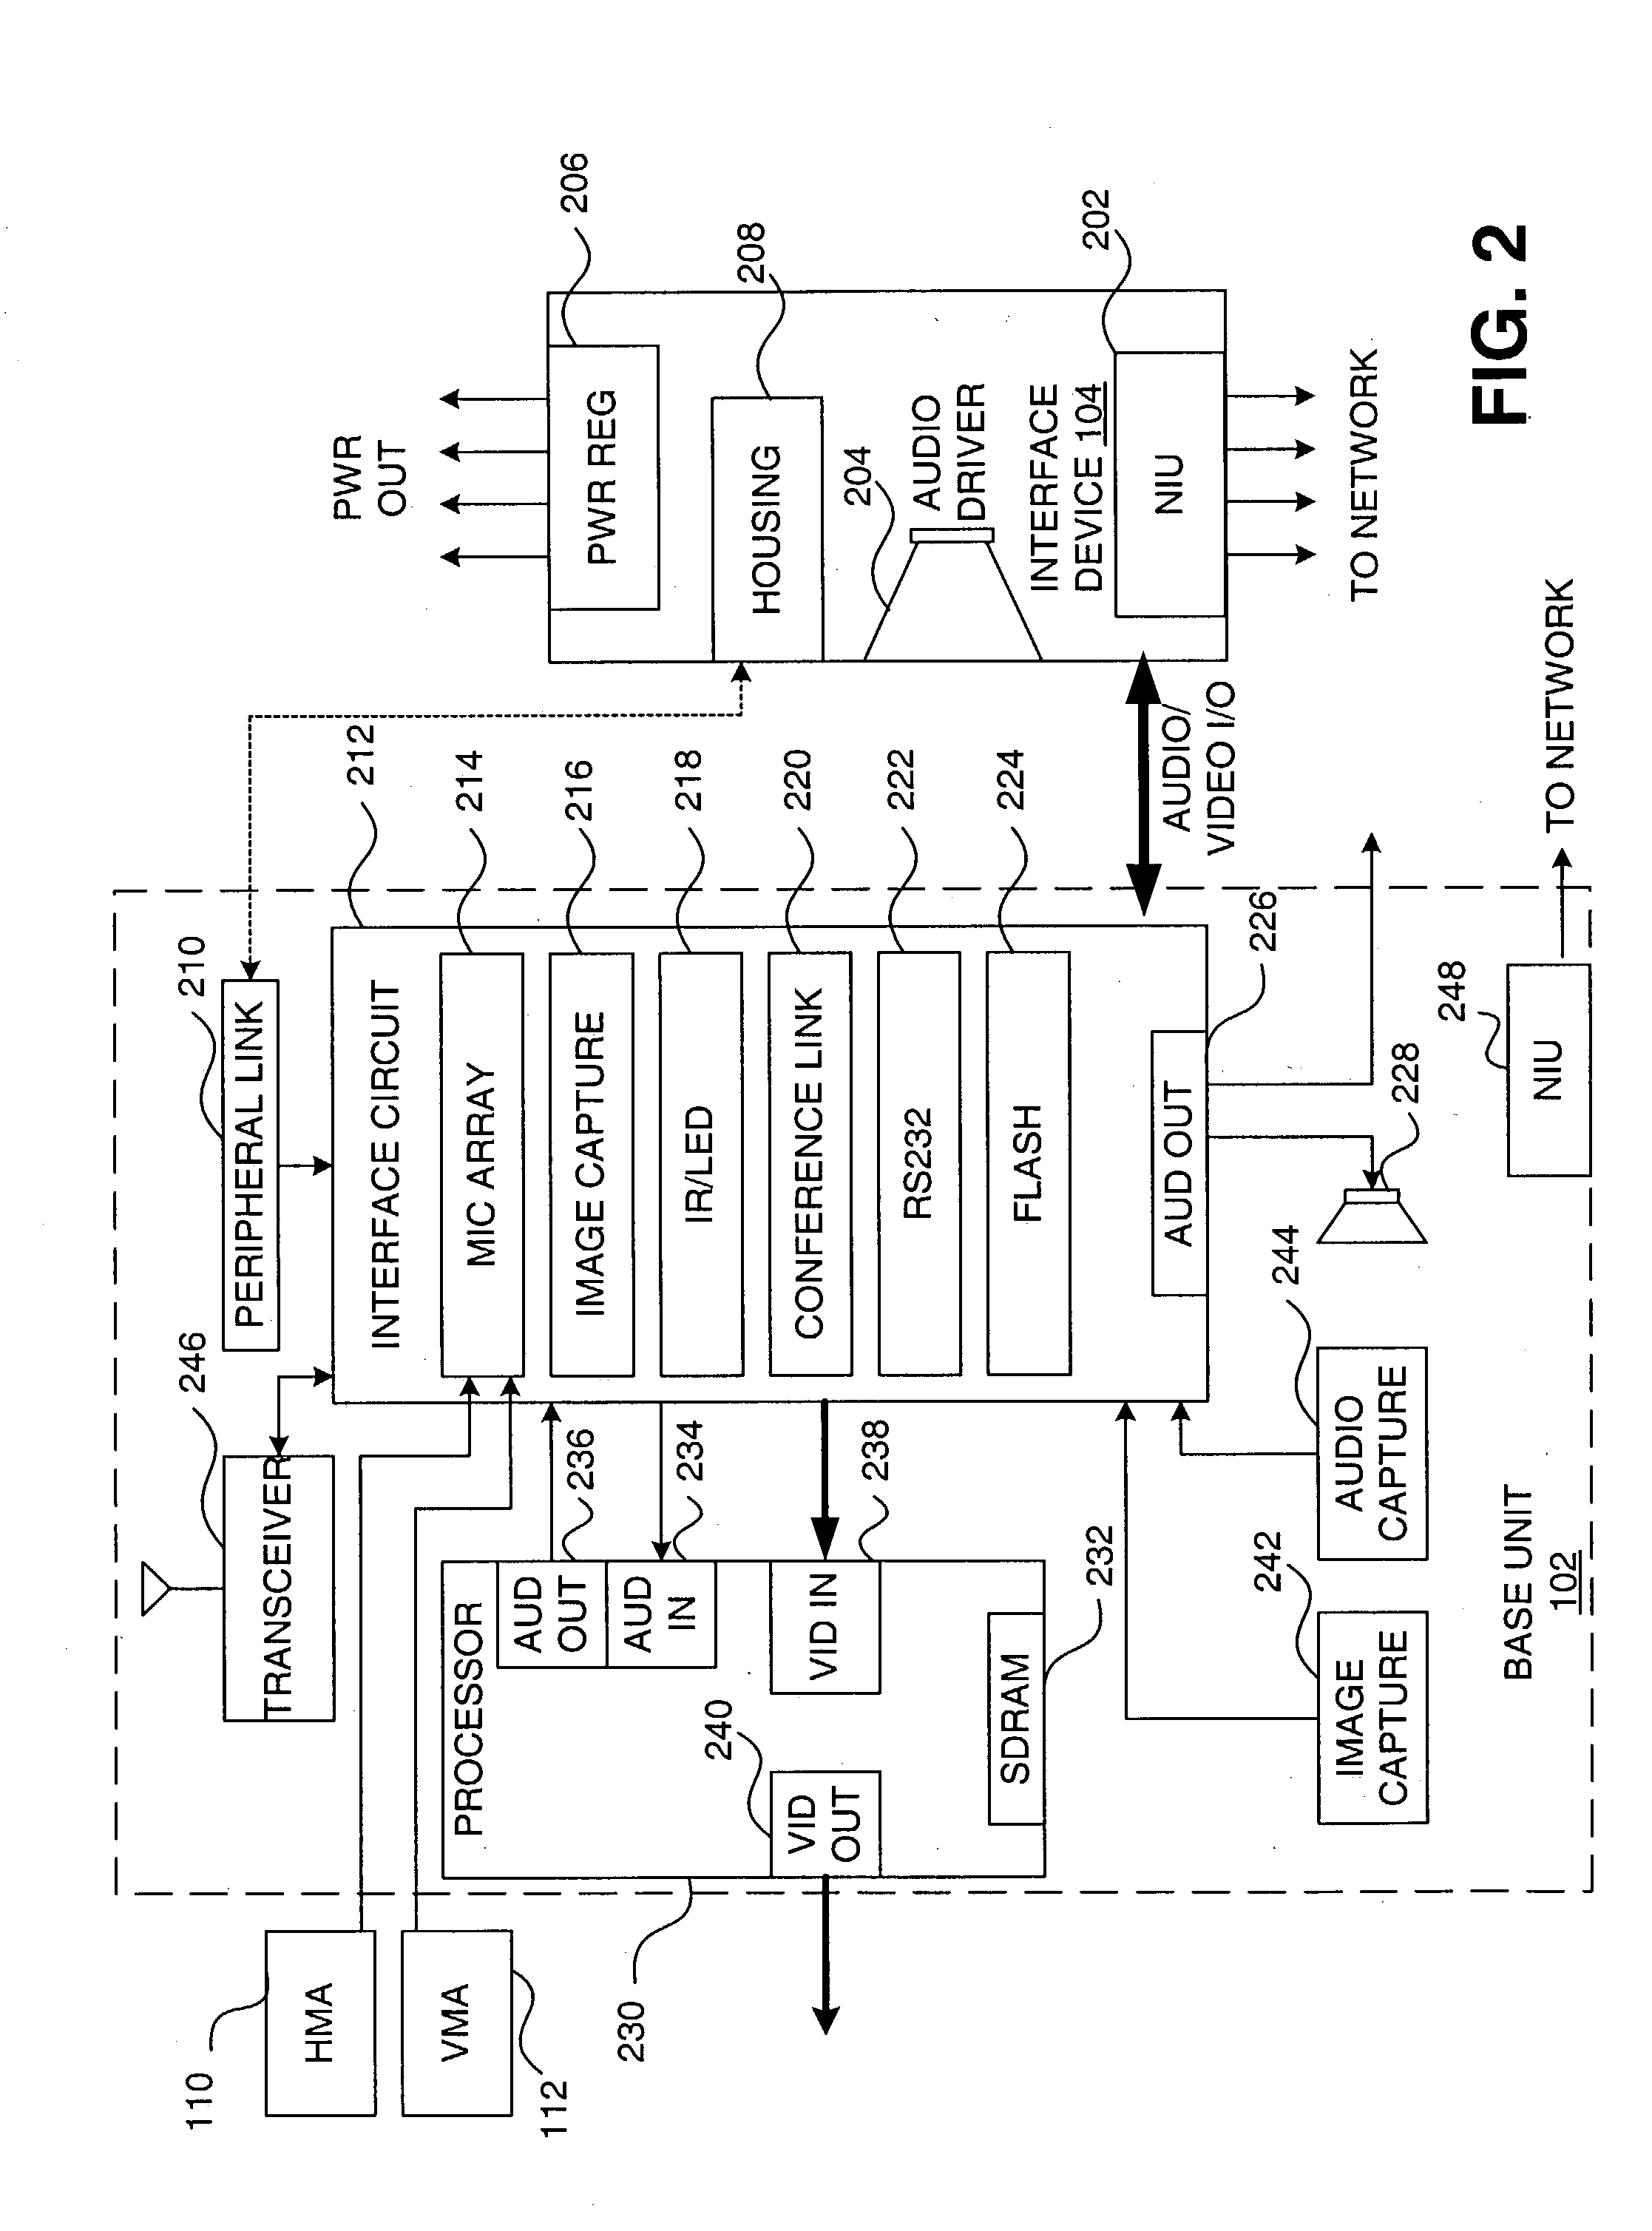 Conferencing system with integrated audio driver and network interface device